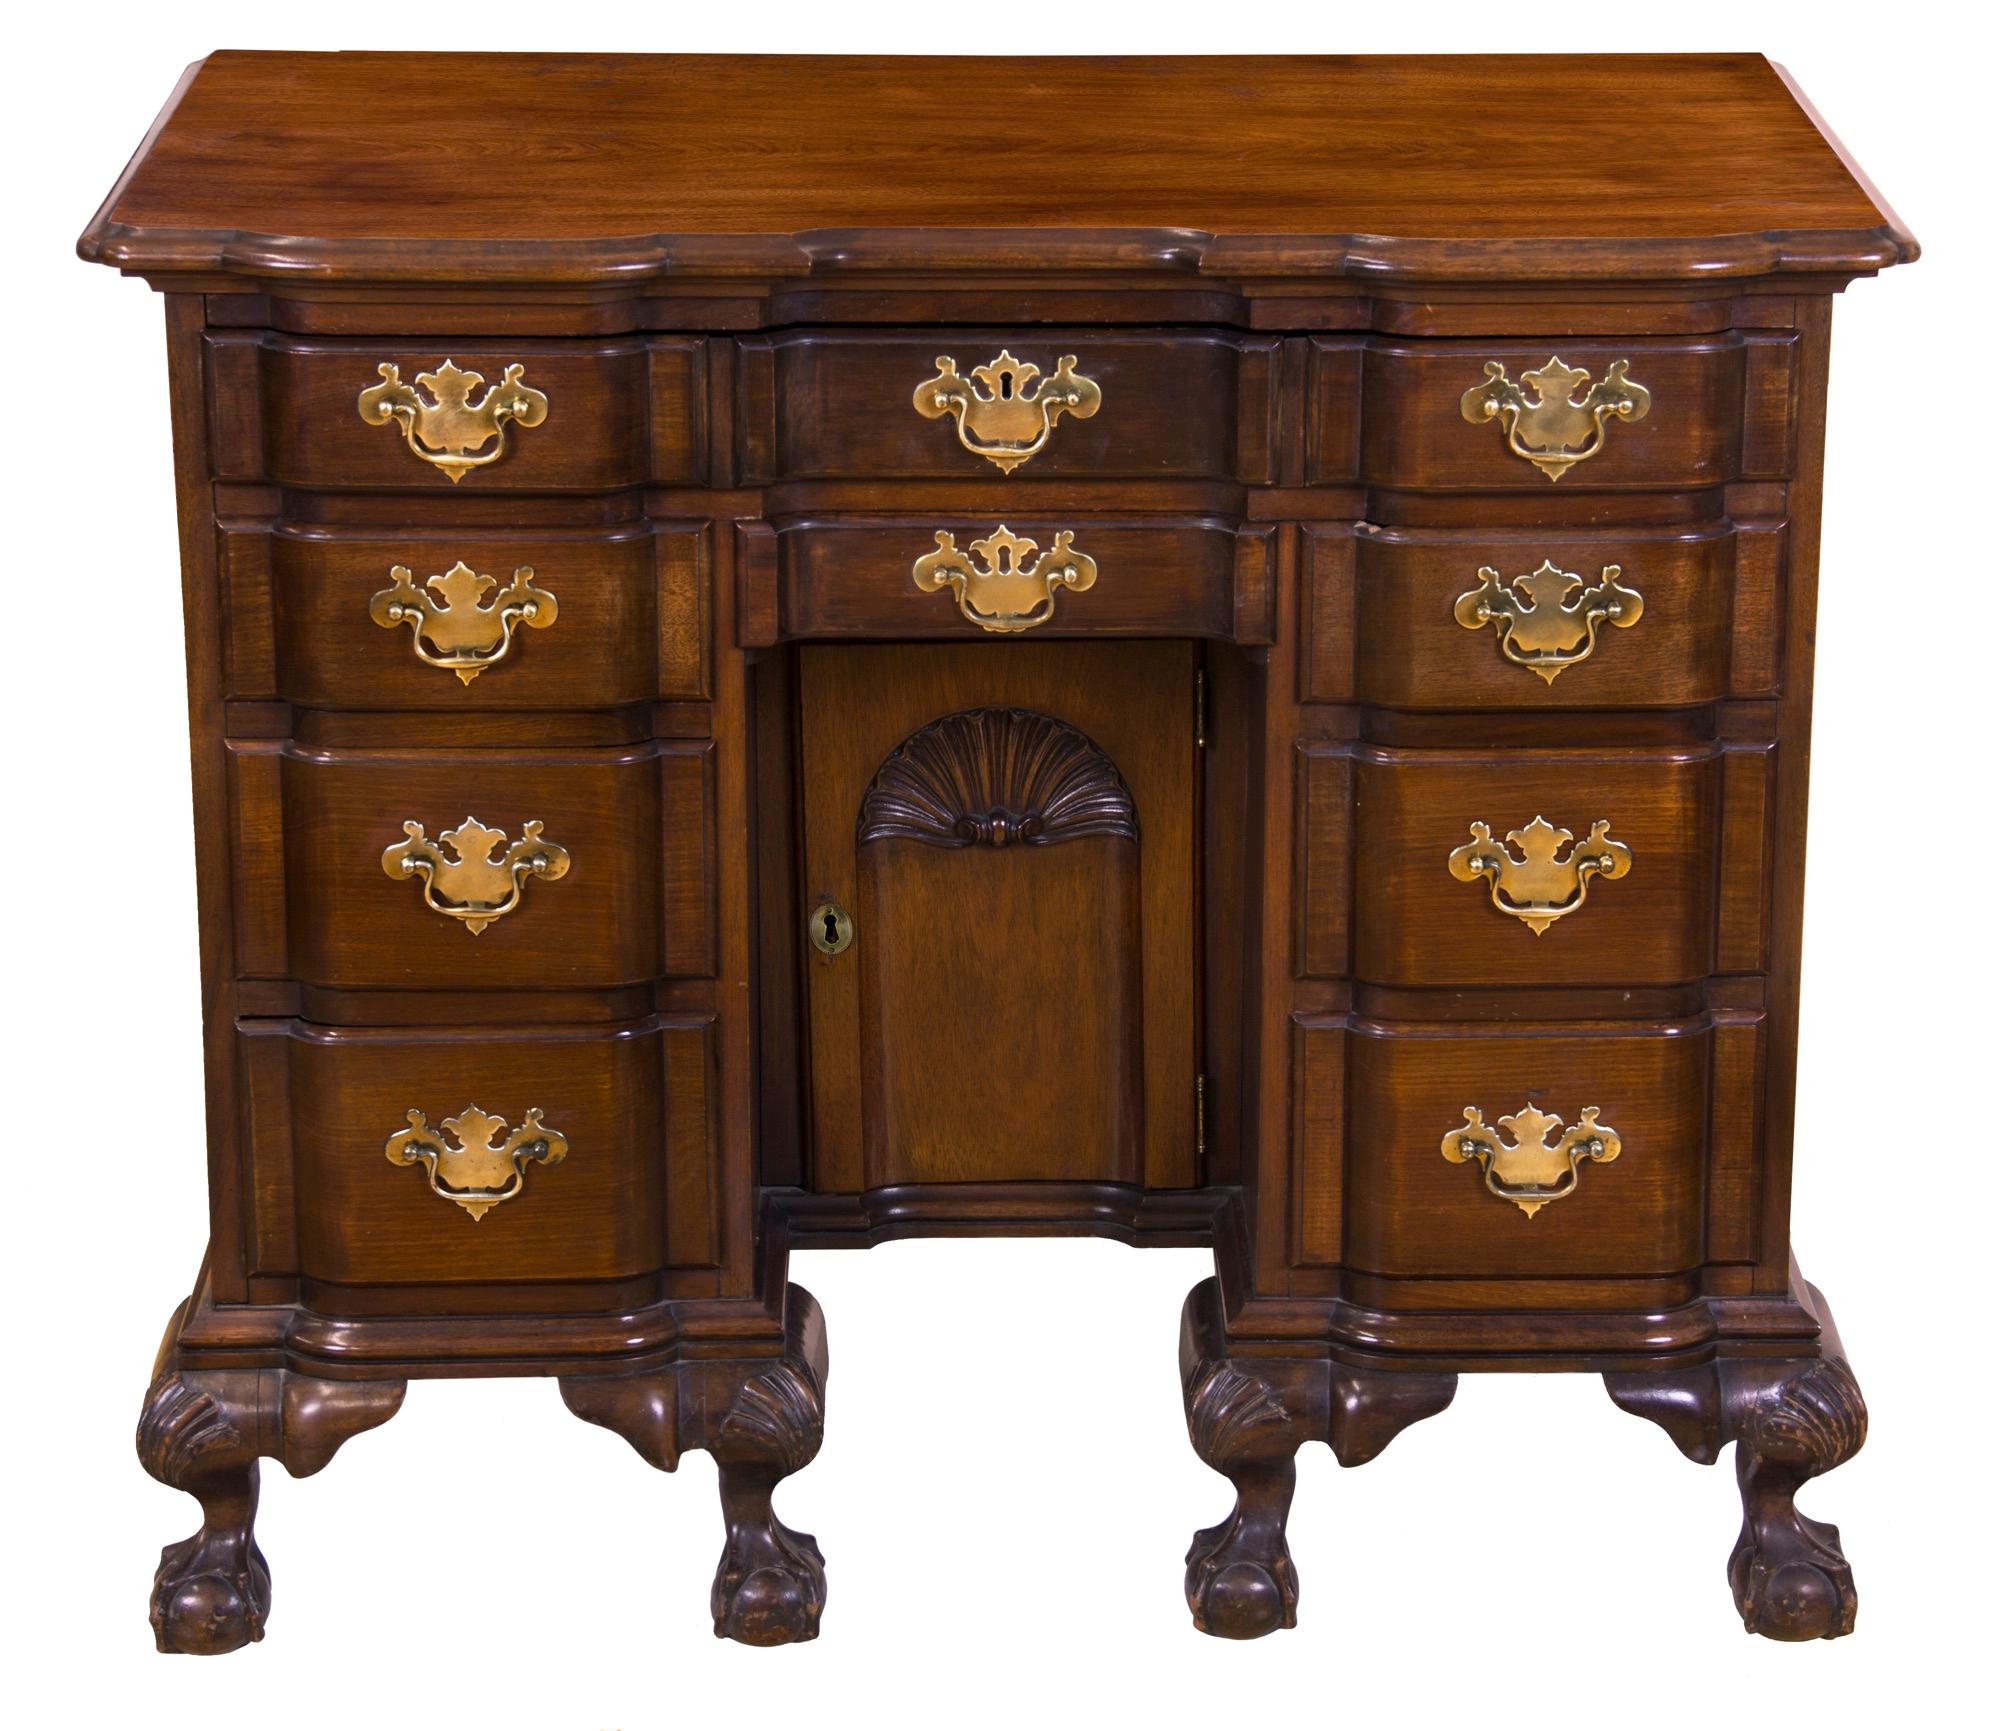 While non-period furniture is something we rarely, if ever, offer, this kneehole desk is an exception. It is handmade and, quality-wise, is as Fine as a period example. Note the magnificent shell on the tombstone door. The Claw and ball feet are